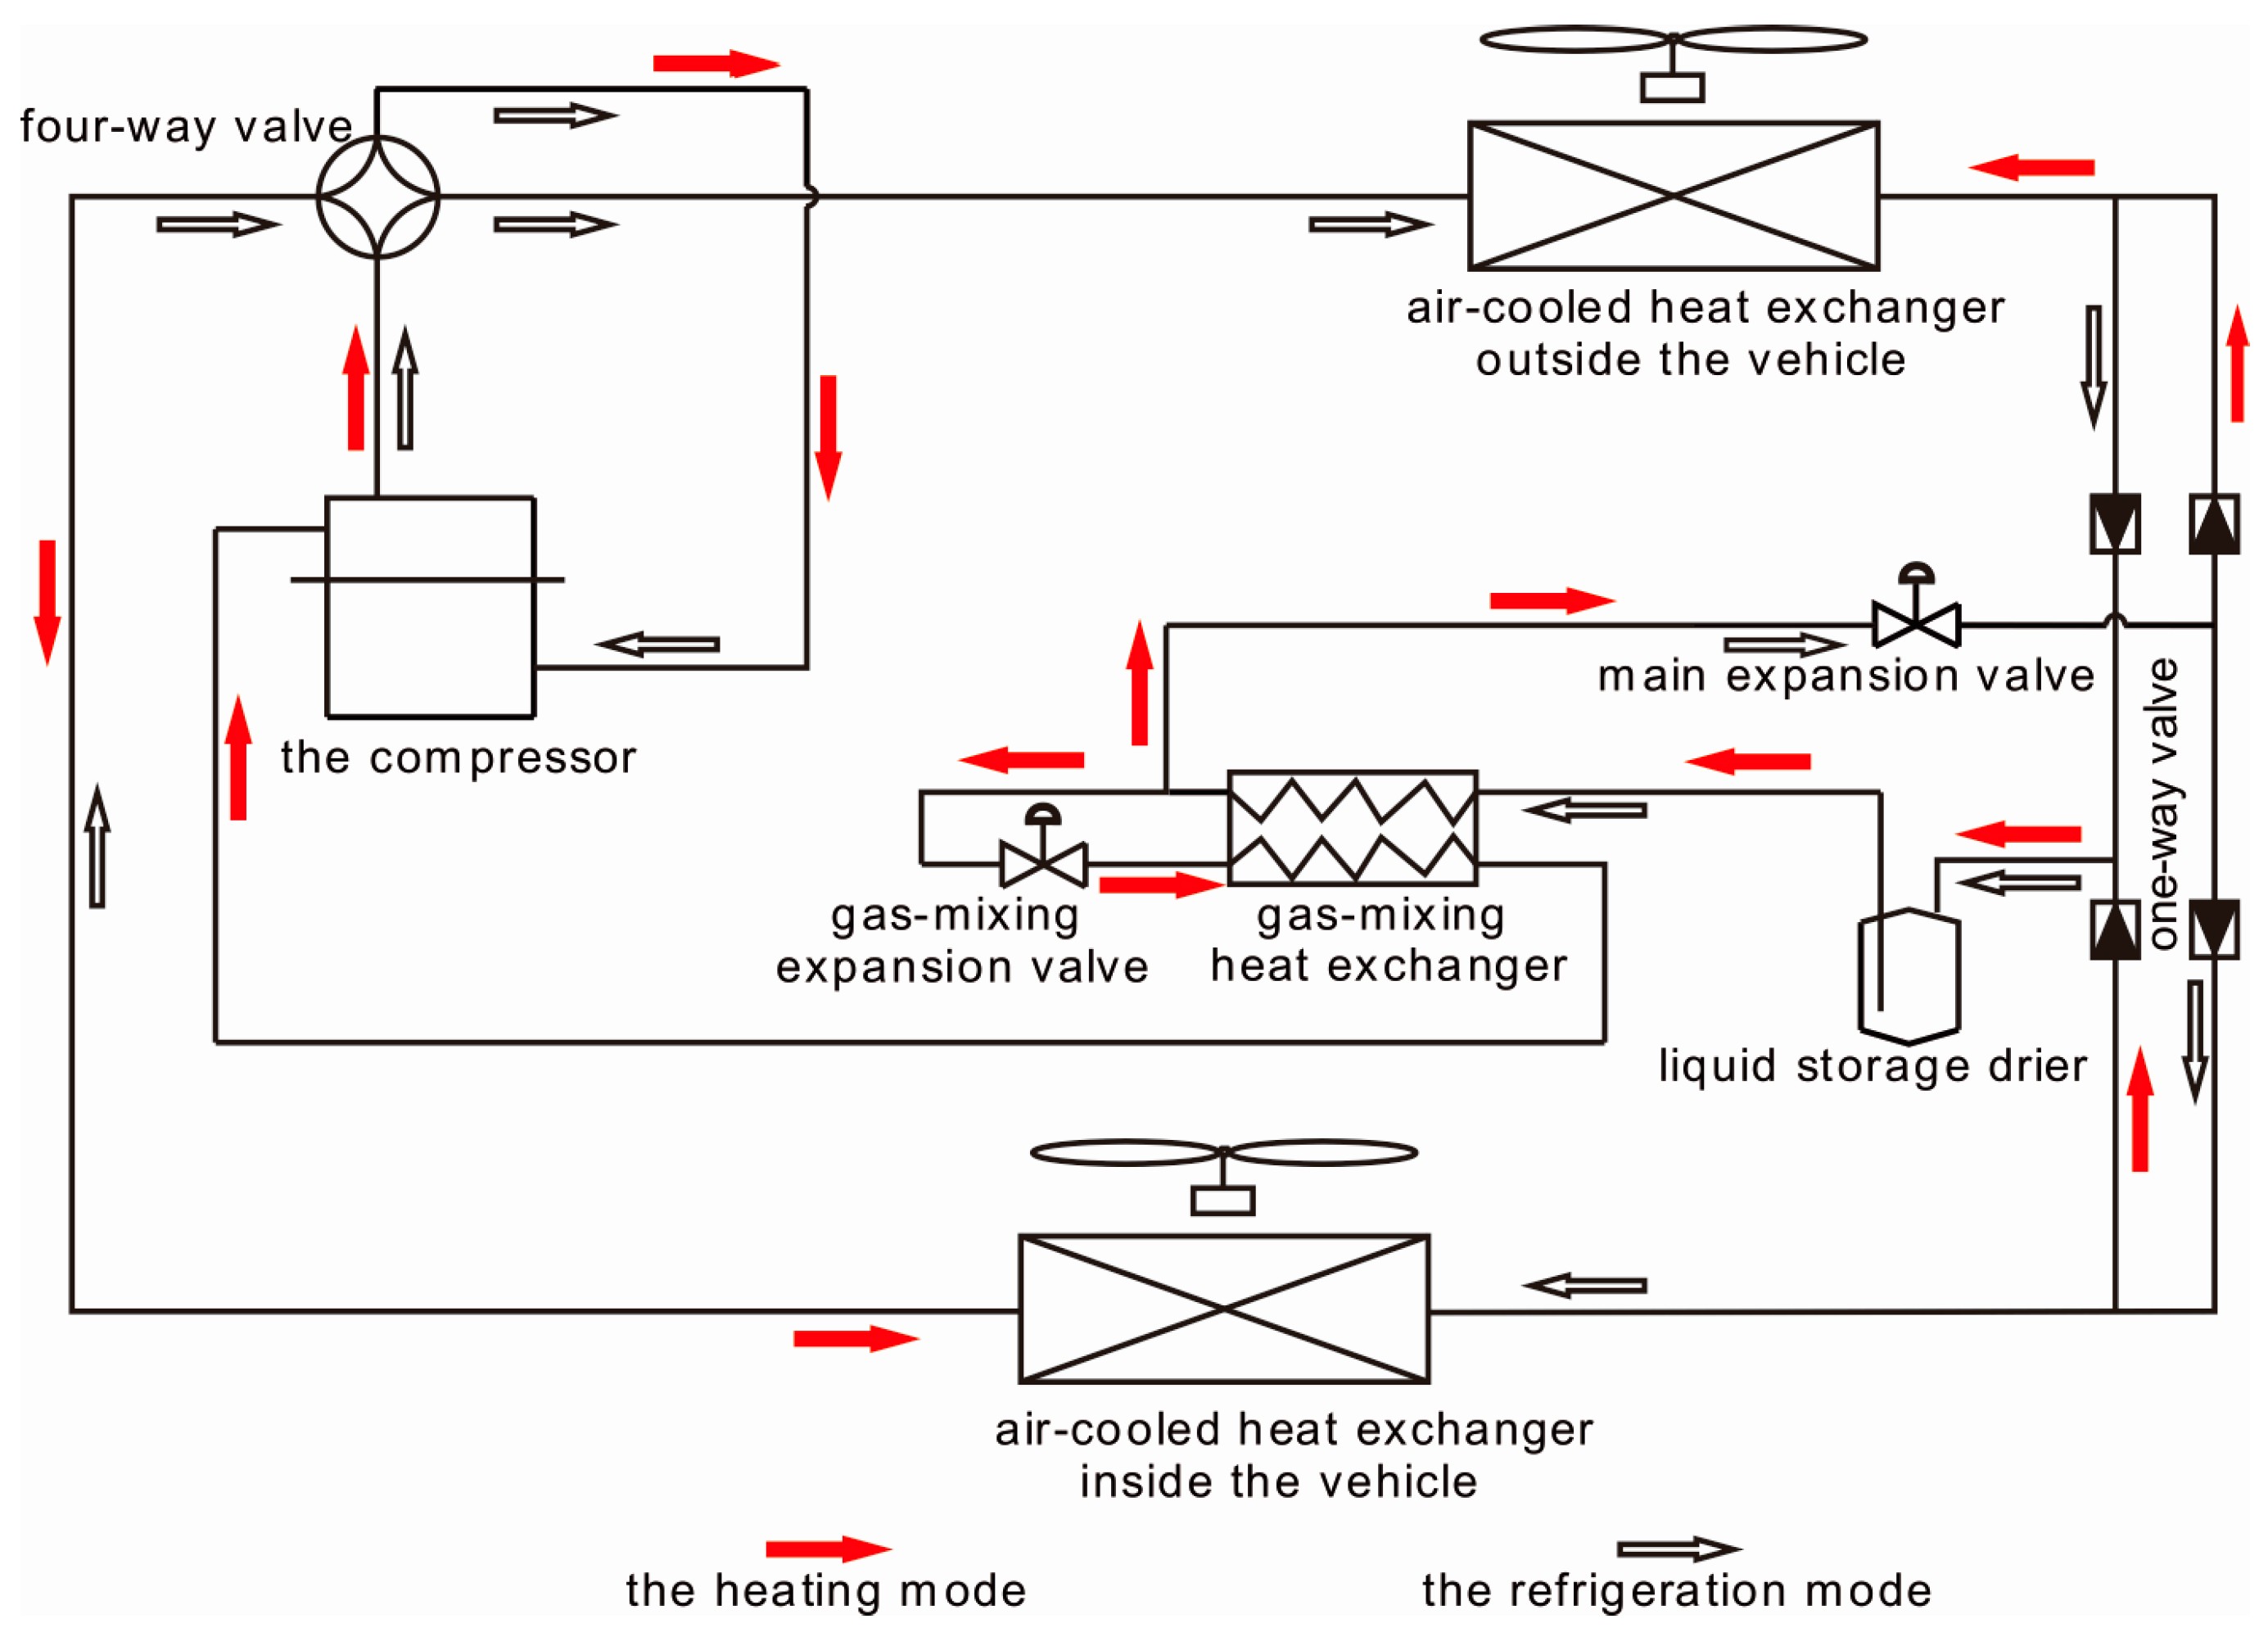 Automotive Cooling System Diagram Energies Free Full Text Of Automotive Cooling System Diagram